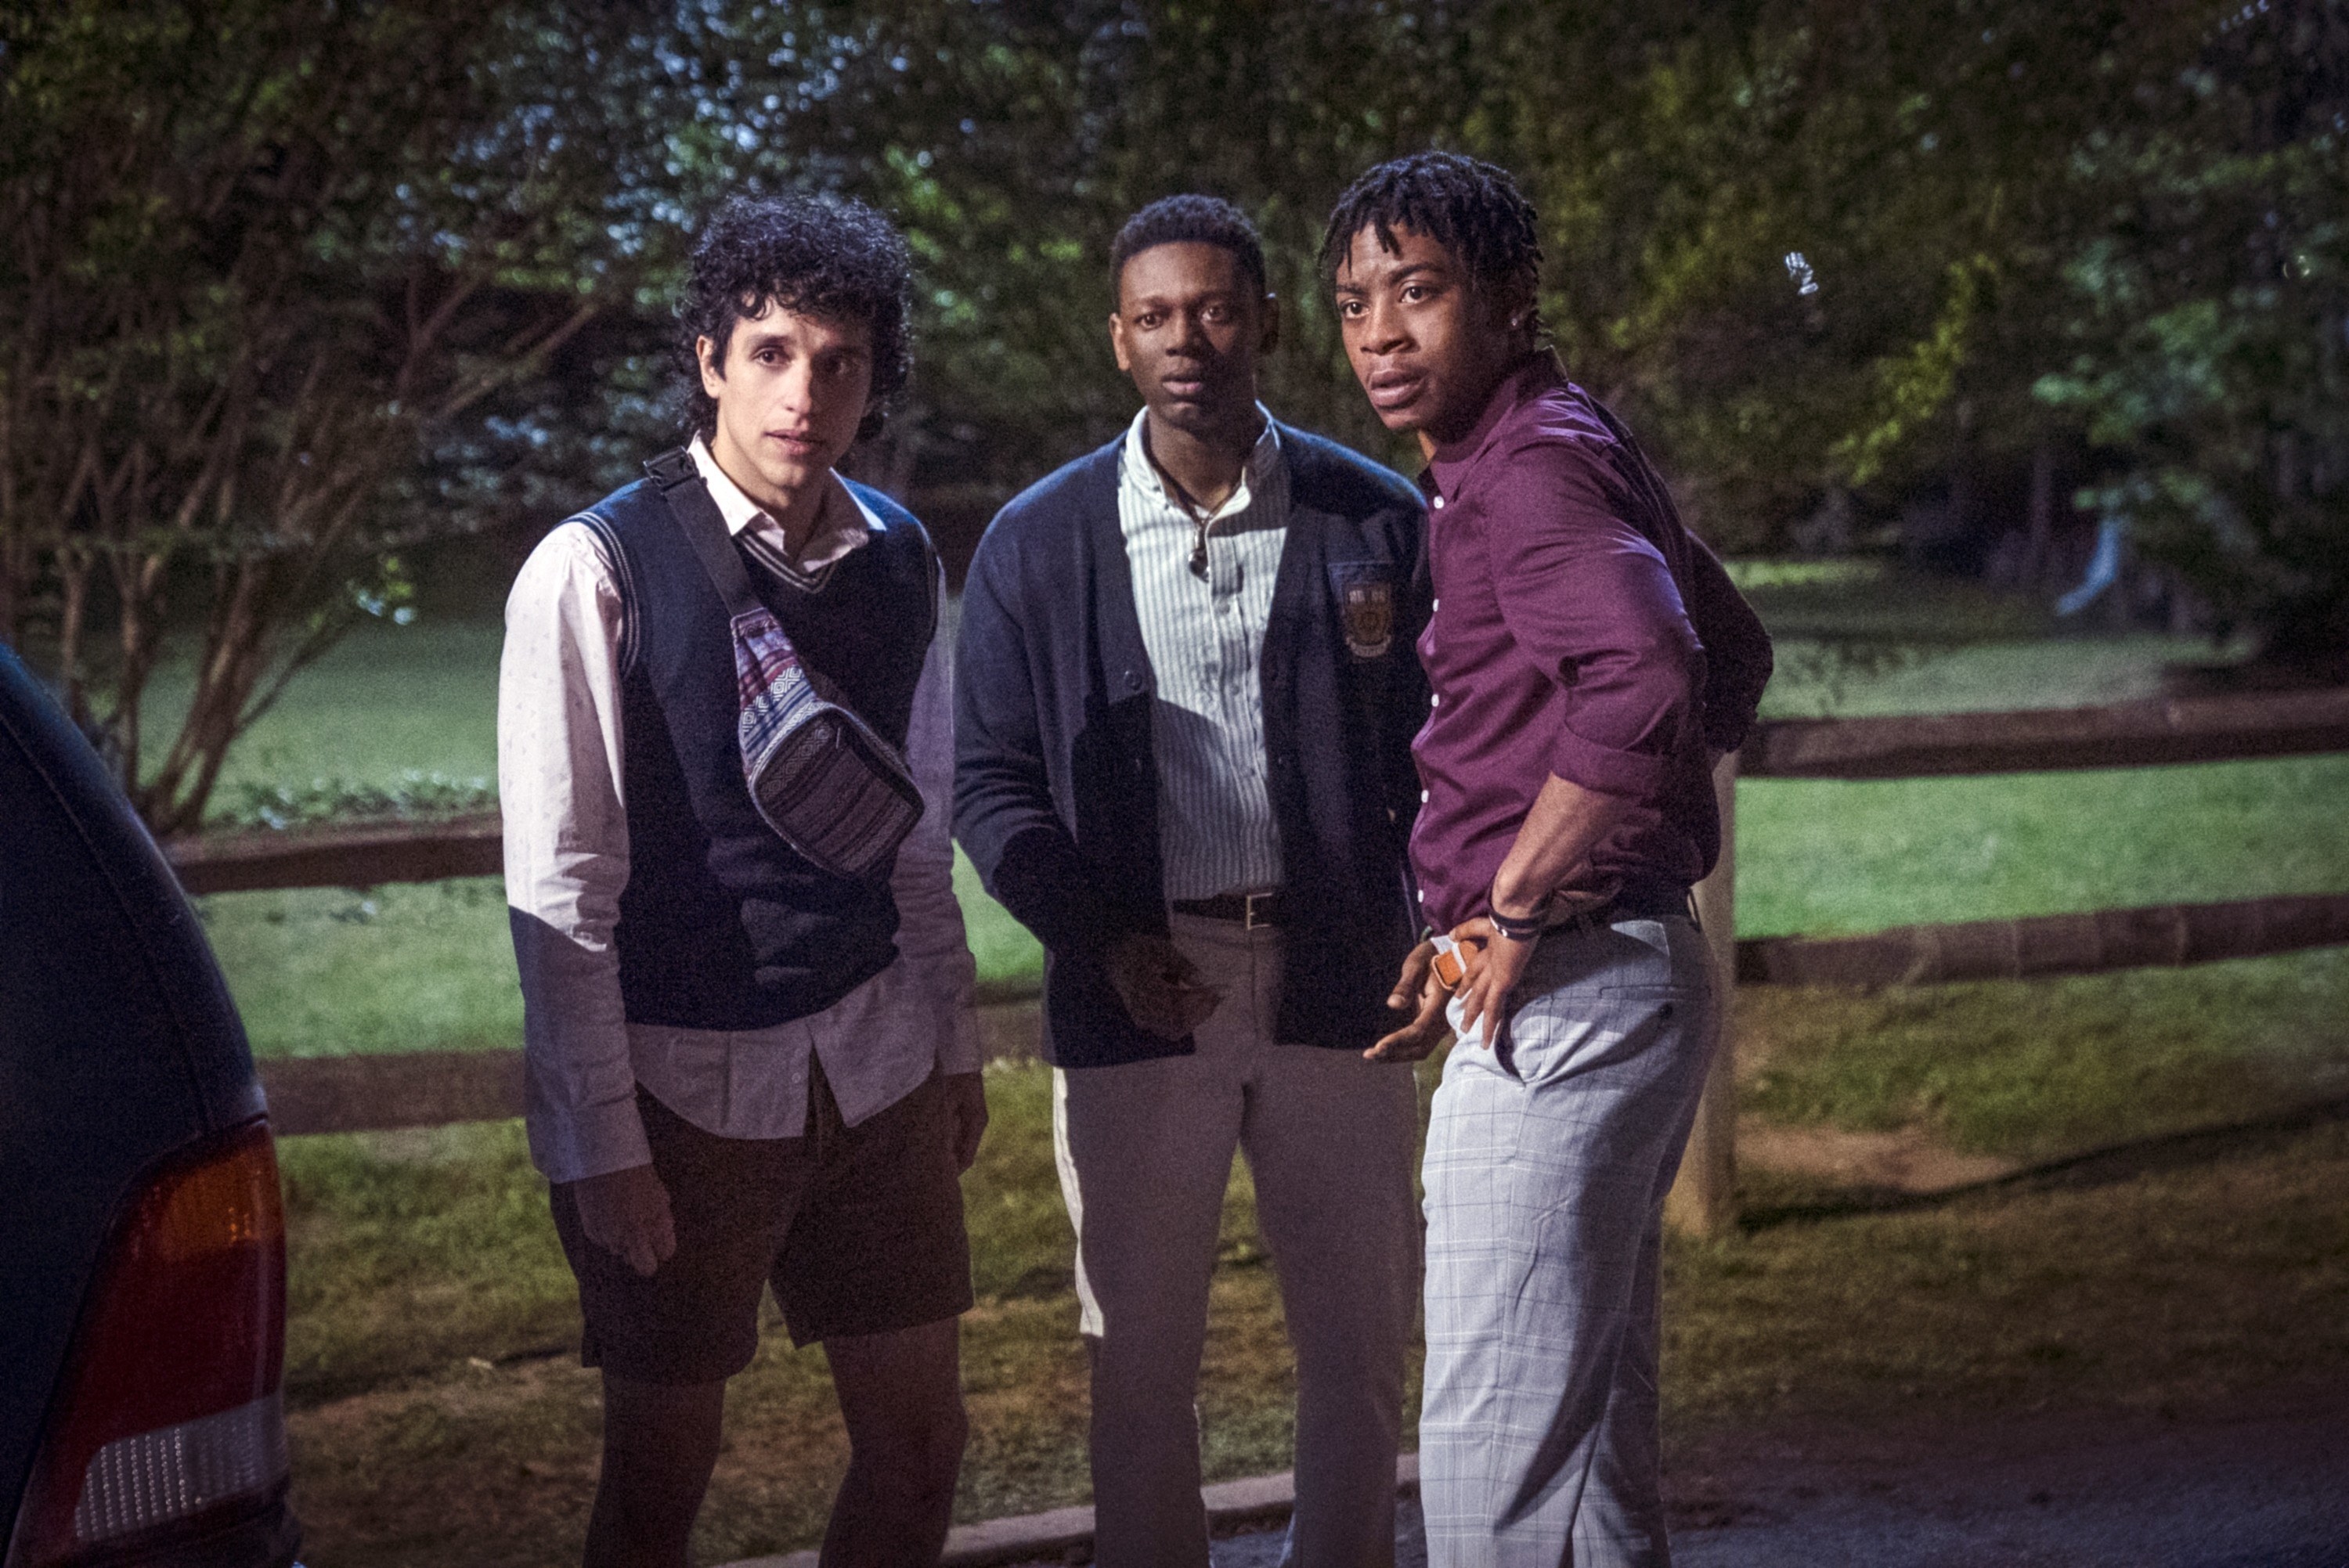 Sebastian Chacon, Donald Elise Watkins, and RJ Cyler stand by the side of the road